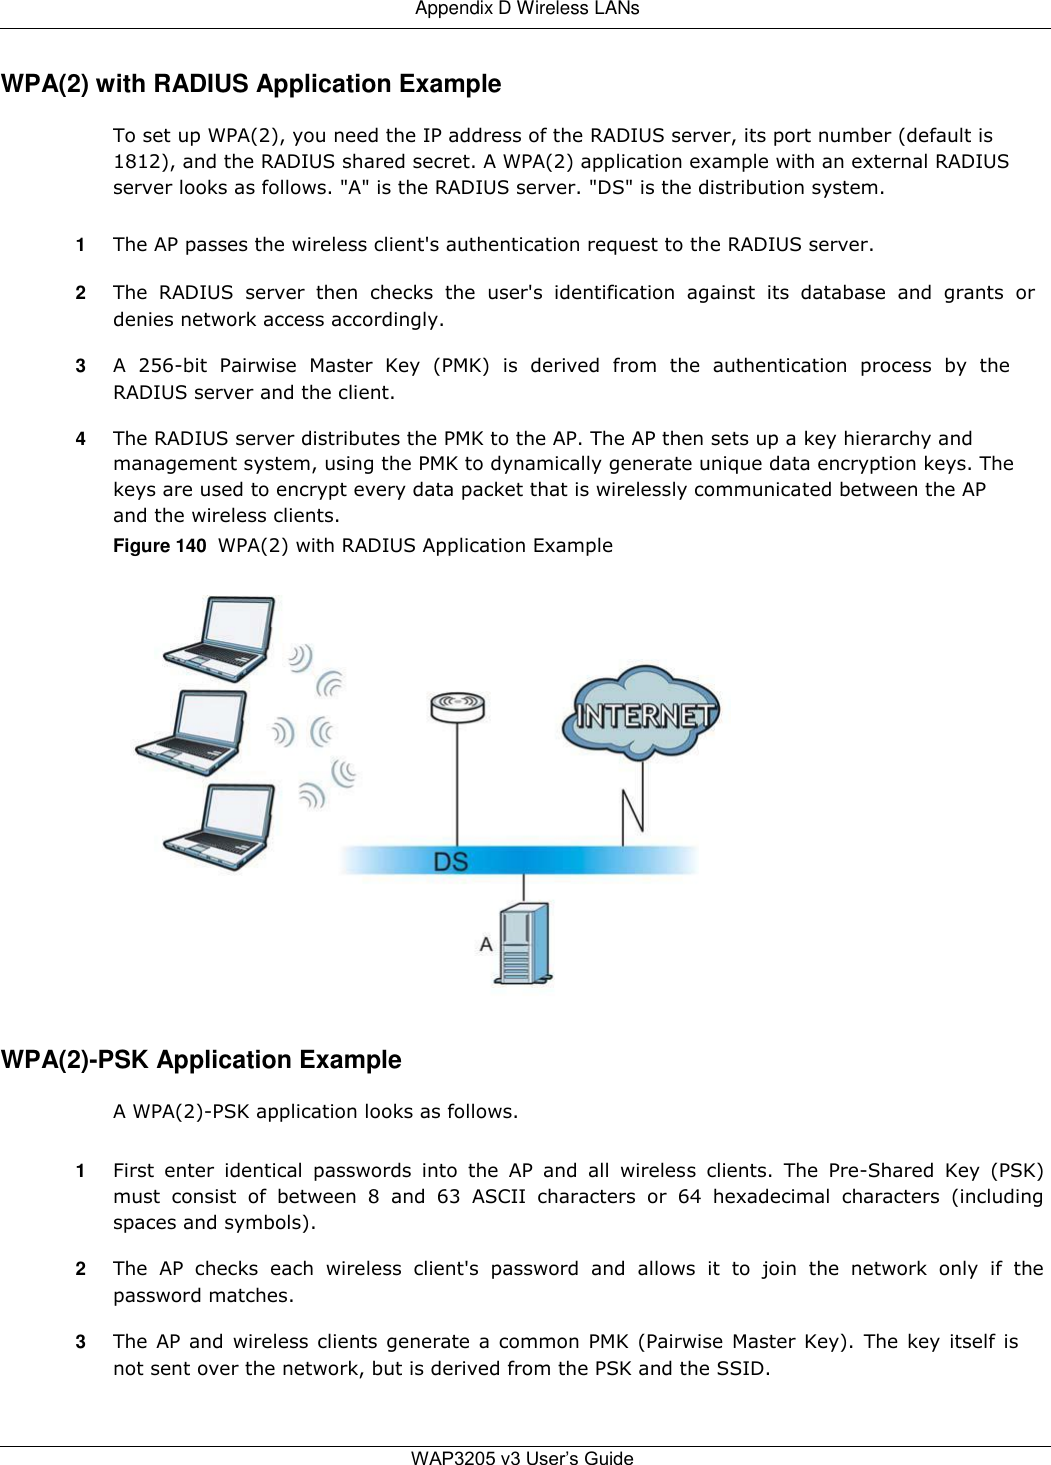  Appendix D Wireless LANs   WPA(2) with RADIUS Application Example  To set up WPA(2), you need the IP address of the RADIUS server, its port number (default is 1812), and the RADIUS shared secret. A WPA(2) application example with an external RADIUS server looks as follows. &quot;A&quot; is the RADIUS server. &quot;DS&quot; is the distribution system.  1  The AP passes the wireless client&apos;s authentication request to the RADIUS server.  2  The  RADIUS  server  then  checks  the  user&apos;s  identification  against  its  database  and  grants  or denies network access accordingly.  3  A  256-bit  Pairwise  Master  Key  (PMK)  is  derived  from  the  authentication  process  by  the RADIUS server and the client.  4  The RADIUS server distributes the PMK to the AP. The AP then sets up a key hierarchy and management system, using the PMK to dynamically generate unique data encryption keys. The keys are used to encrypt every data packet that is wirelessly communicated between the AP and the wireless clients.  Figure 140  WPA(2) with RADIUS Application Example                        WPA(2)-PSK Application Example  A WPA(2)-PSK application looks as follows.  1  First  enter  identical  passwords  into  the  AP  and  all  wireless  clients.  The  Pre-Shared  Key  (PSK) must  consist  of  between  8  and  63  ASCII  characters  or  64  hexadecimal  characters  (including spaces and symbols).  2  The  AP  checks  each  wireless  client&apos;s  password  and  allows  it  to  join  the  network  only  if  the password matches.  3  The AP and wireless clients generate a common PMK (Pairwise Master Key). The key itself is not sent over the network, but is derived from the PSK and the SSID.    WAP3205 v3 User’s Guide 